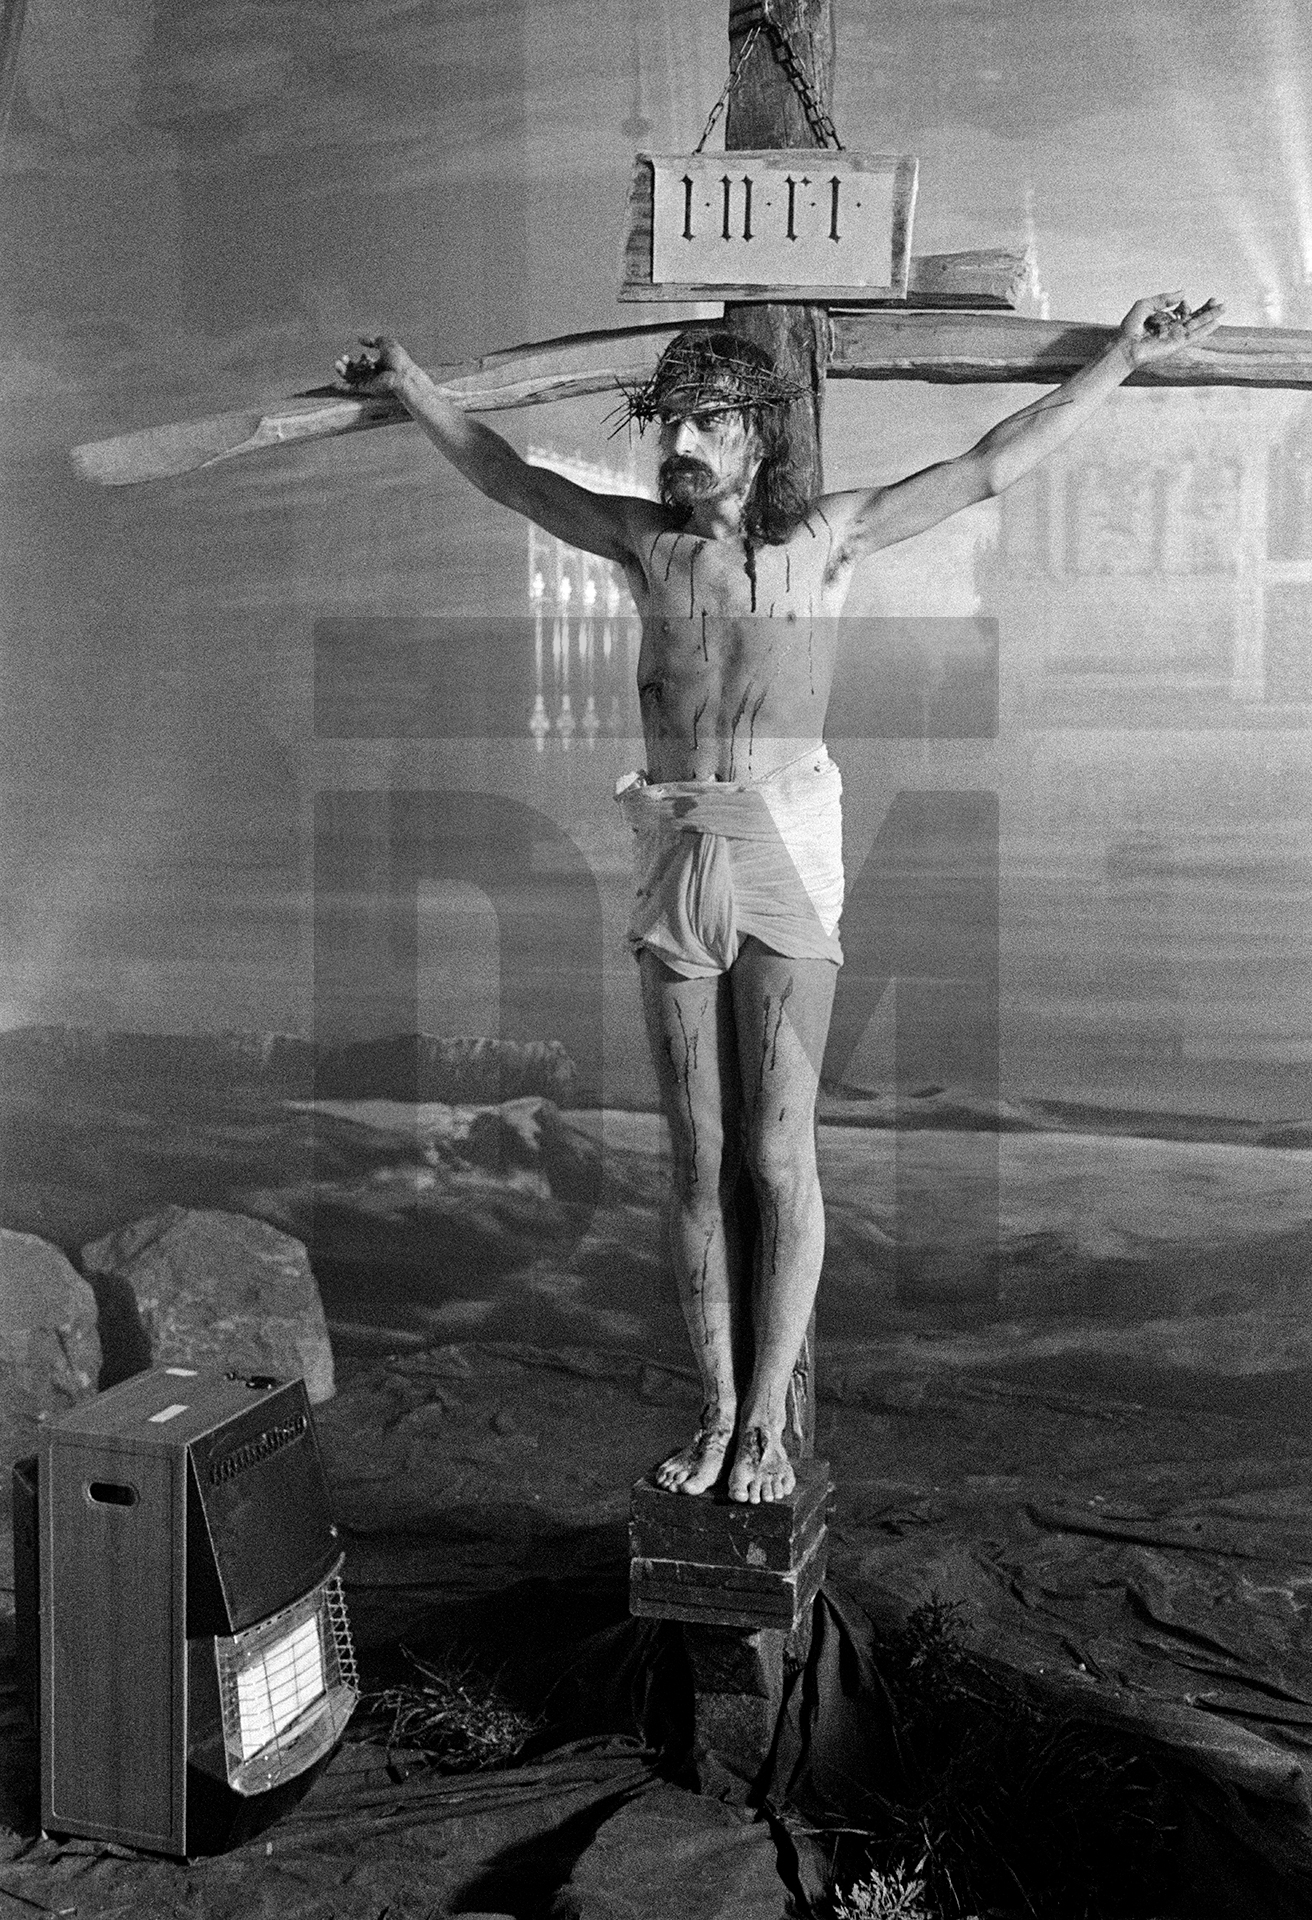 Paul Waggett [Christ] from Southport, a social security appeals tribunal clerk, in the Crucifixion scene, on the set at St Francis Xavier church, Everton. Tony Palmer’s ‘Hindemith’ for LWT’s South Bank Show, March 1989 by Daniel Meadows